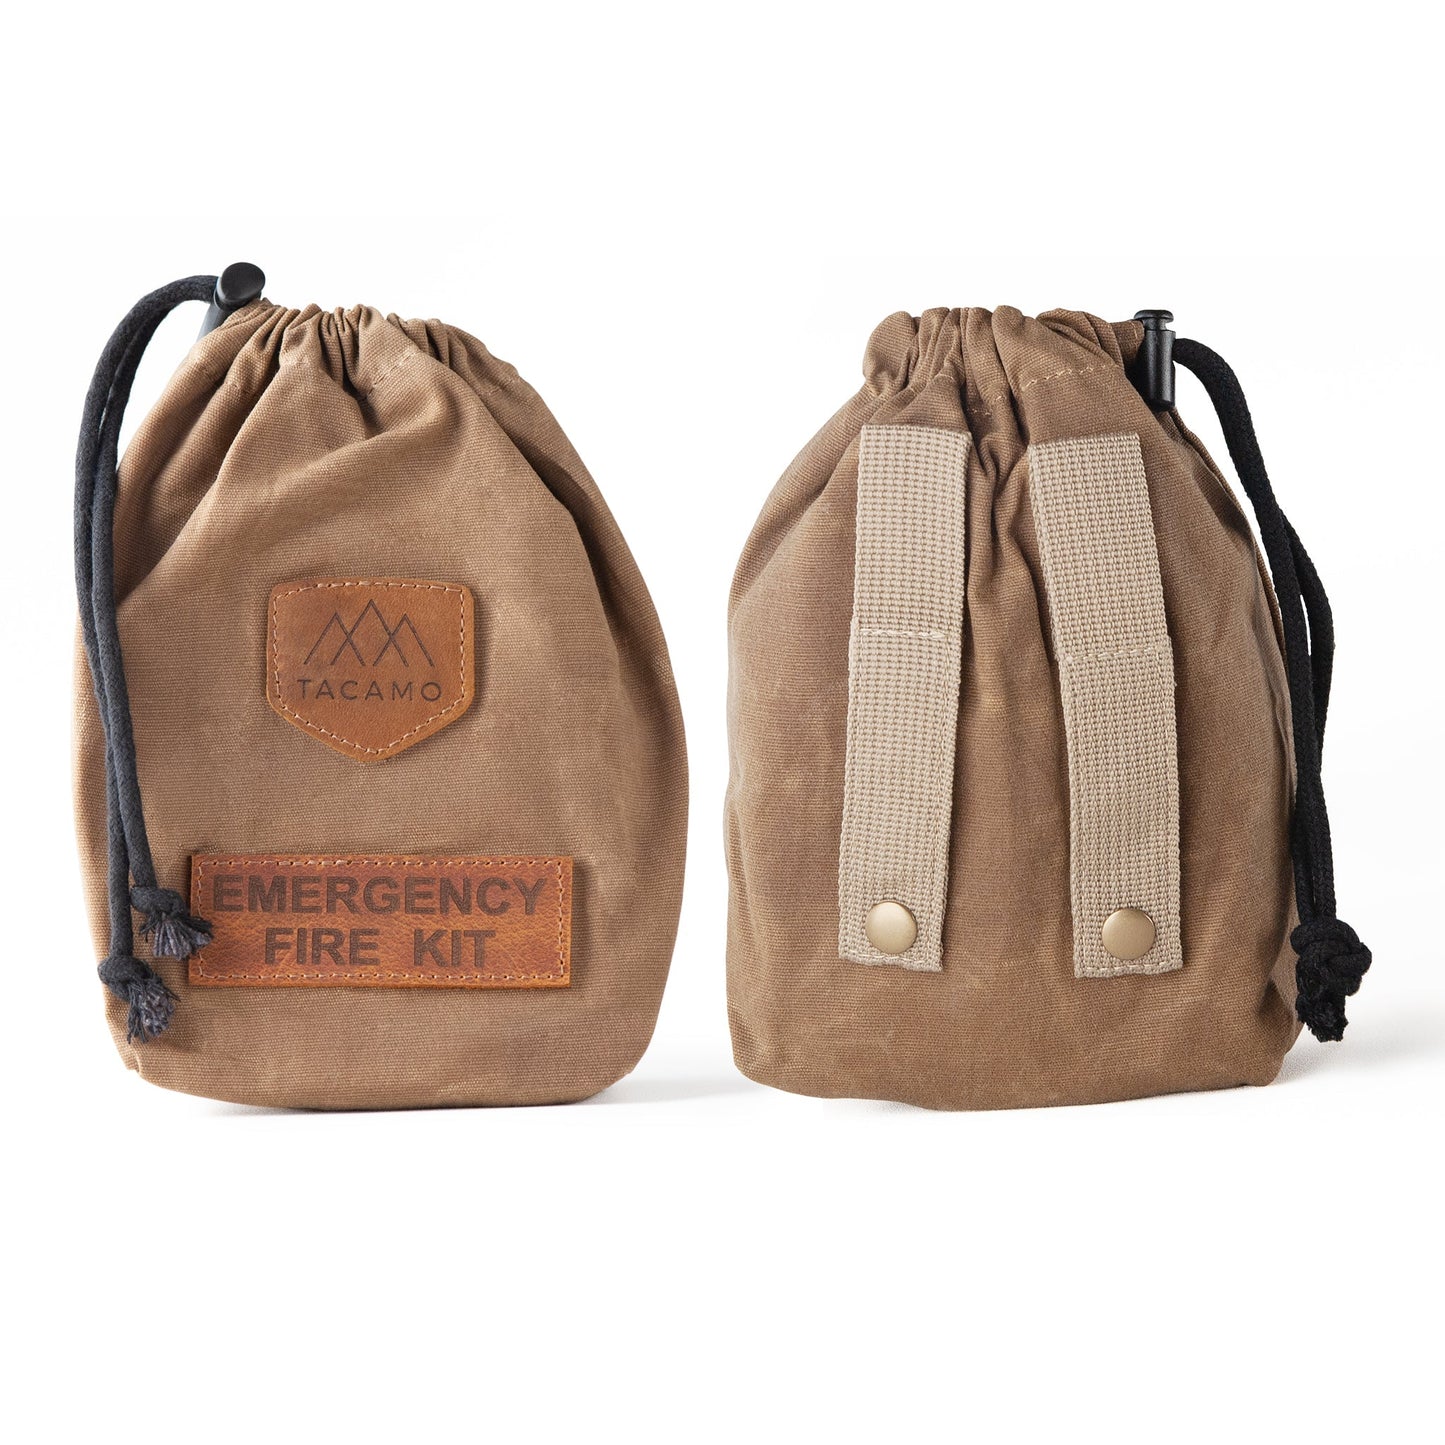 Durable canvas bag showing front and back from the TACAMO 15-Piece Emergency Fire Kit